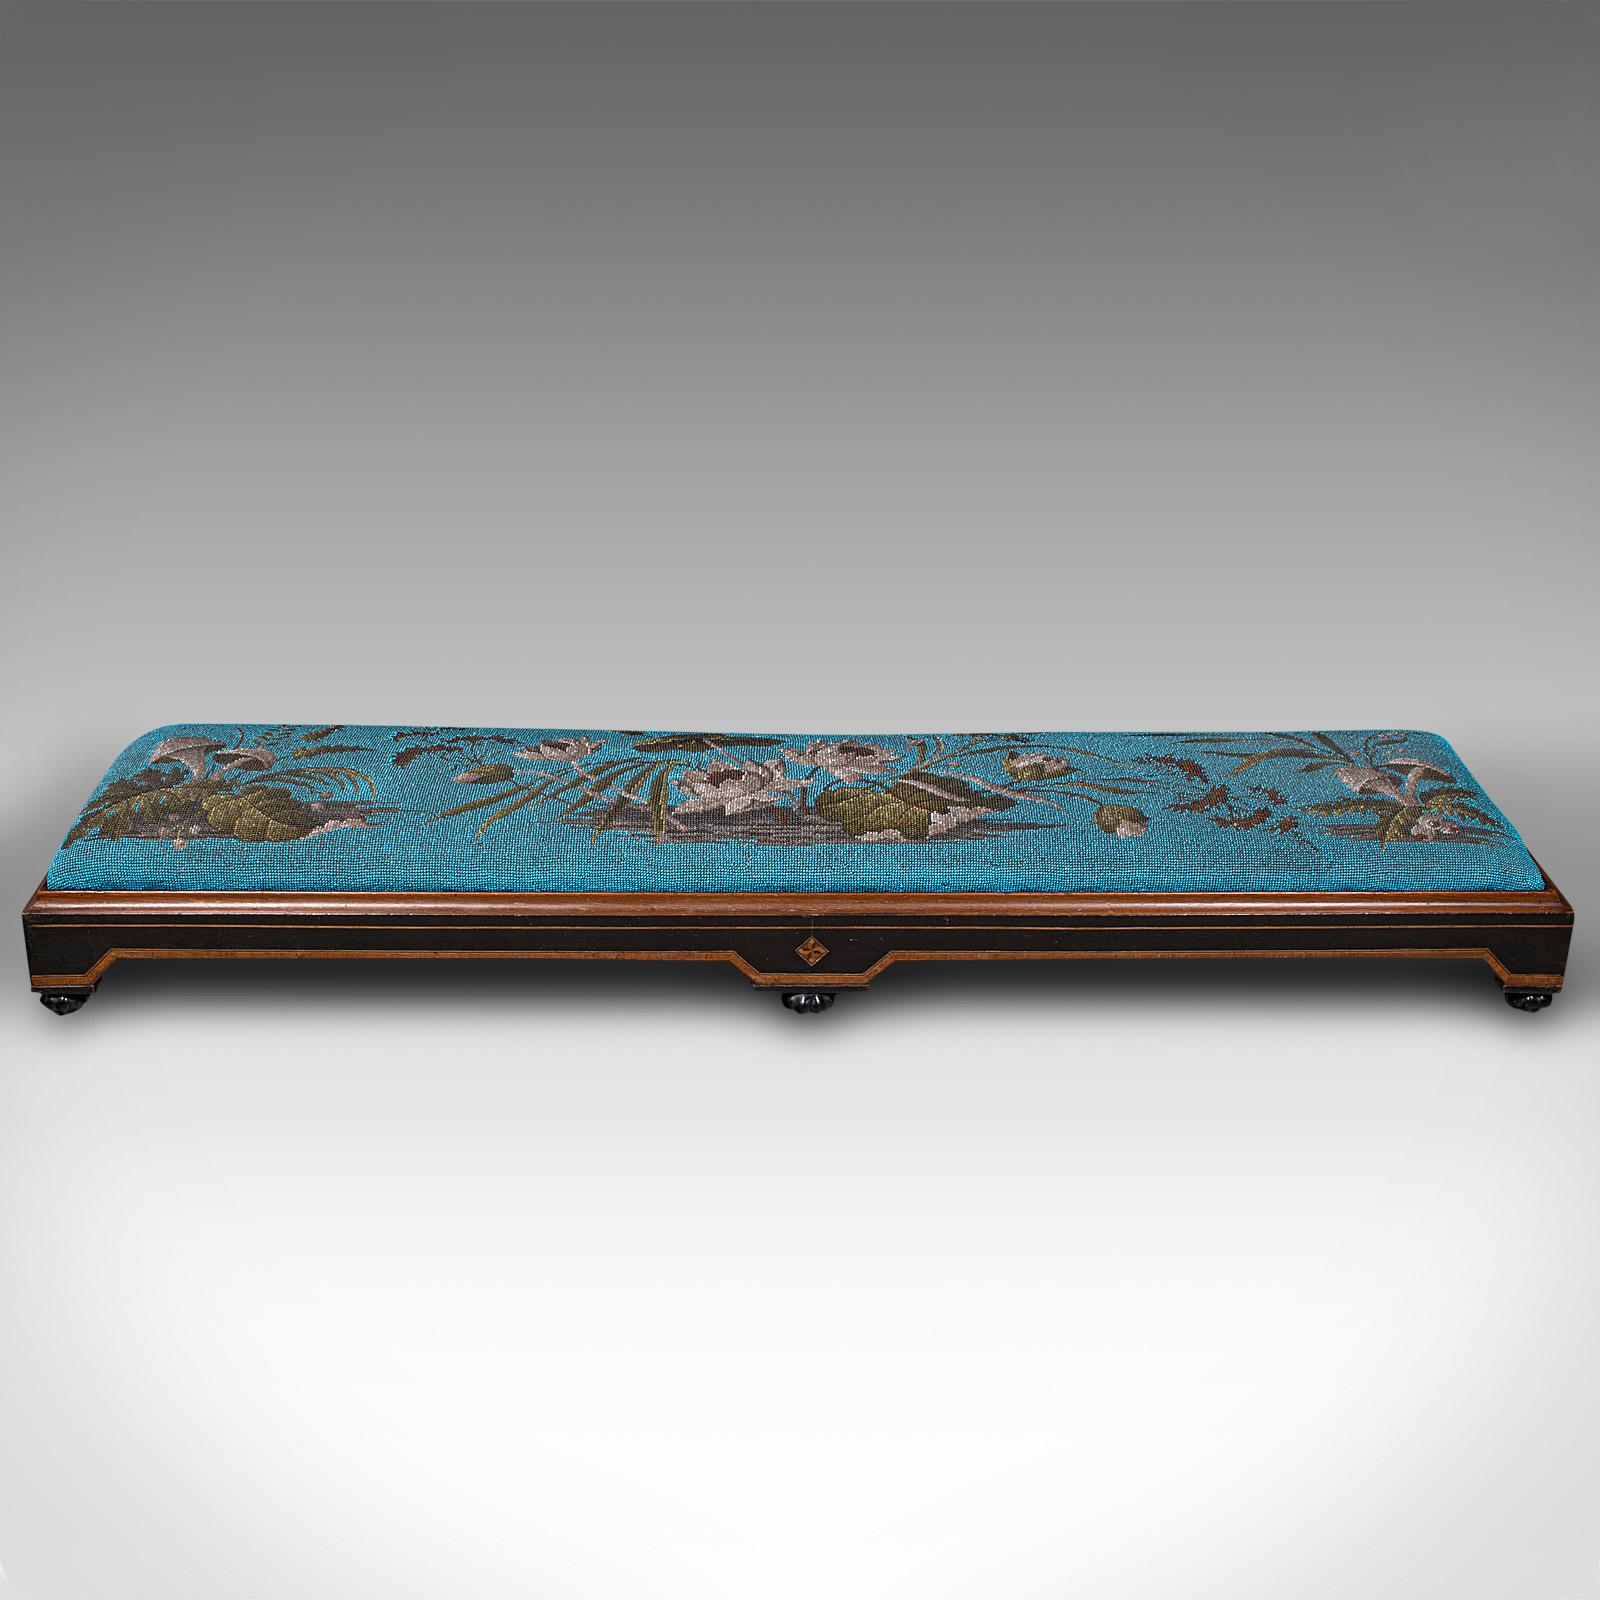 This is an antique carriage foot rest. An English, mahogany and boxwood beadwork cushion stool, dating to the late Victorian Aesthetic period, circa 1890.

Delightfully eye-catching stool with generous proportion
Displays a desirable aged patina and